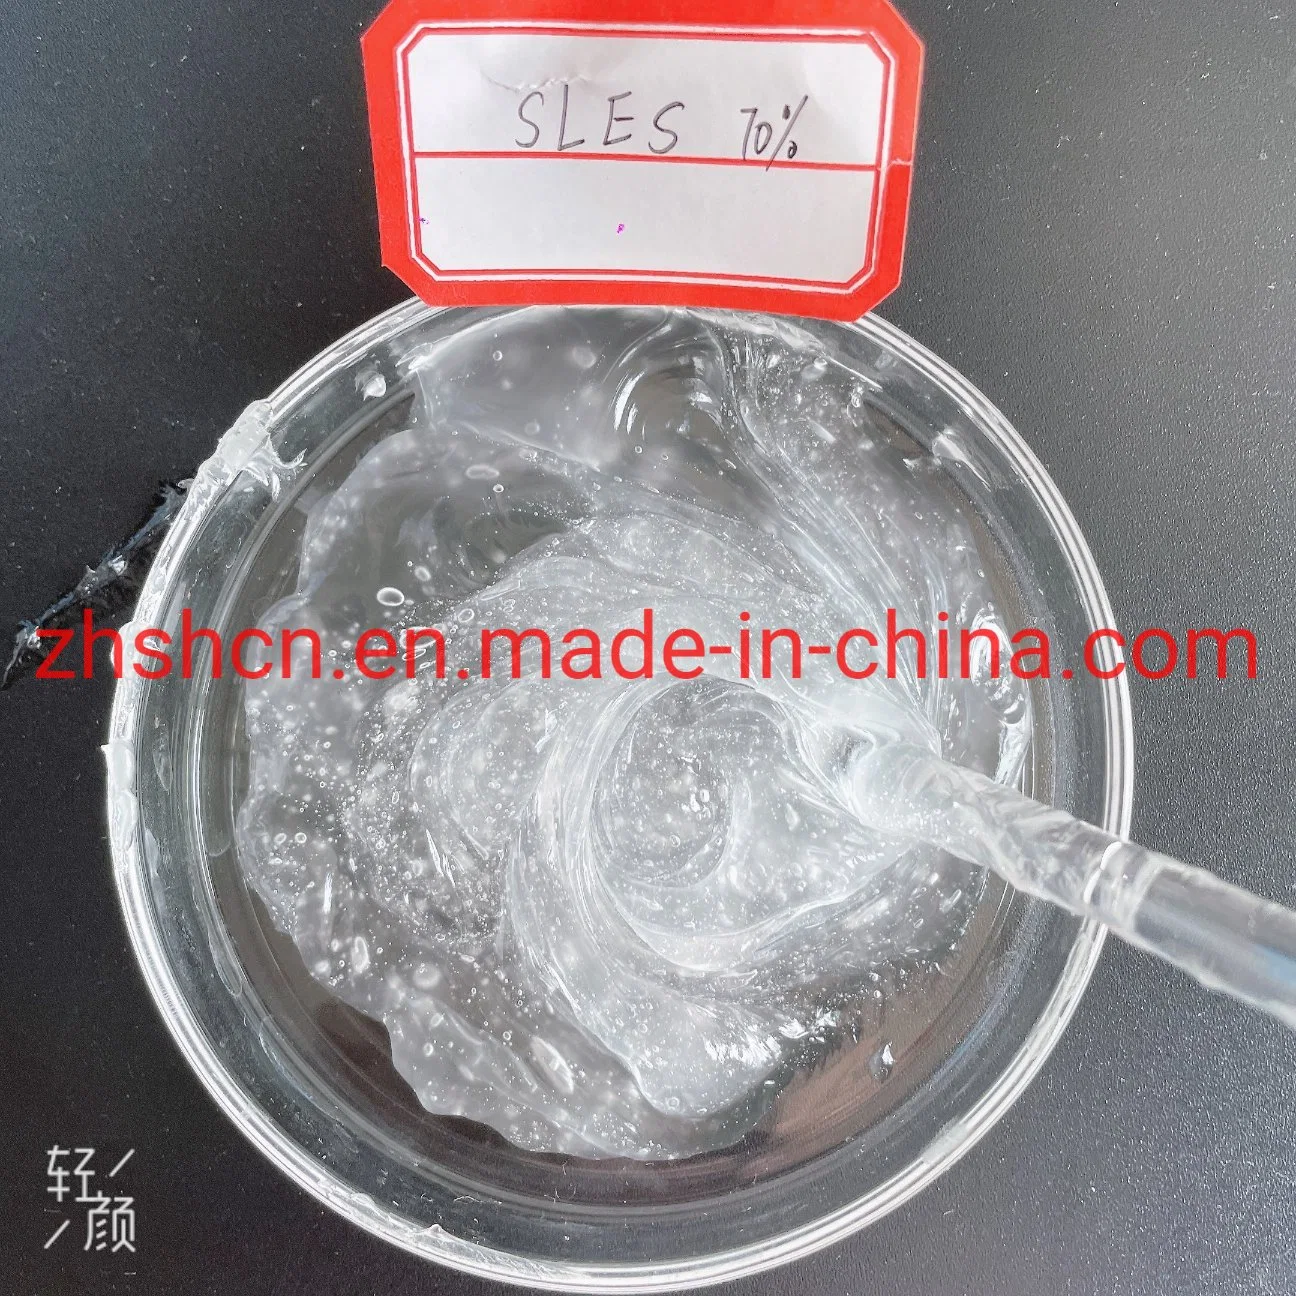 Factory Chemical Raw Materials Good Foaming SLES70% for Sale Price